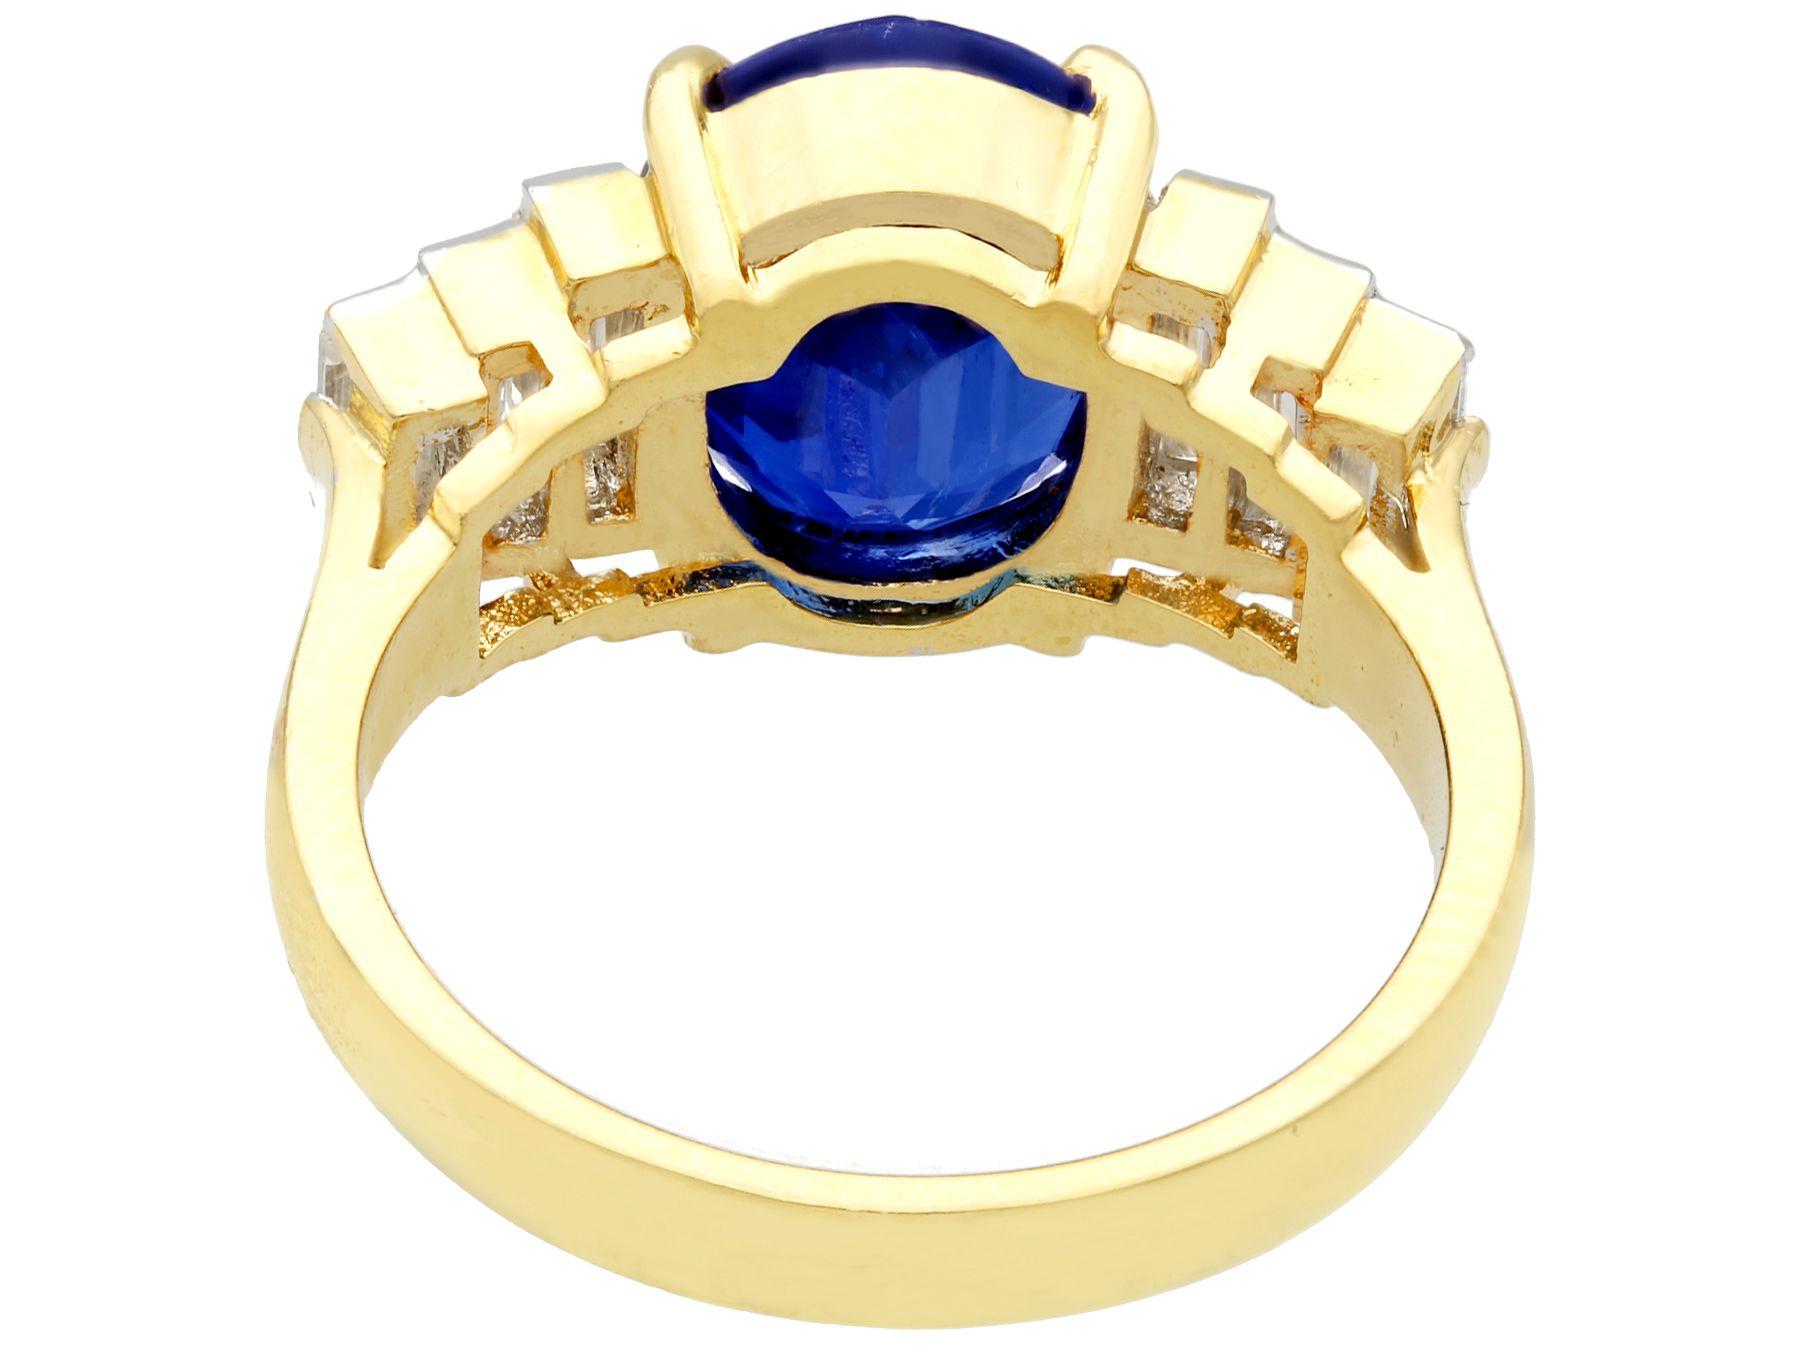 Women's or Men's Vintage 4.59 Carat Oval Cut Sapphire and 1.02 Carat Diamond Yellow Gold Ring For Sale